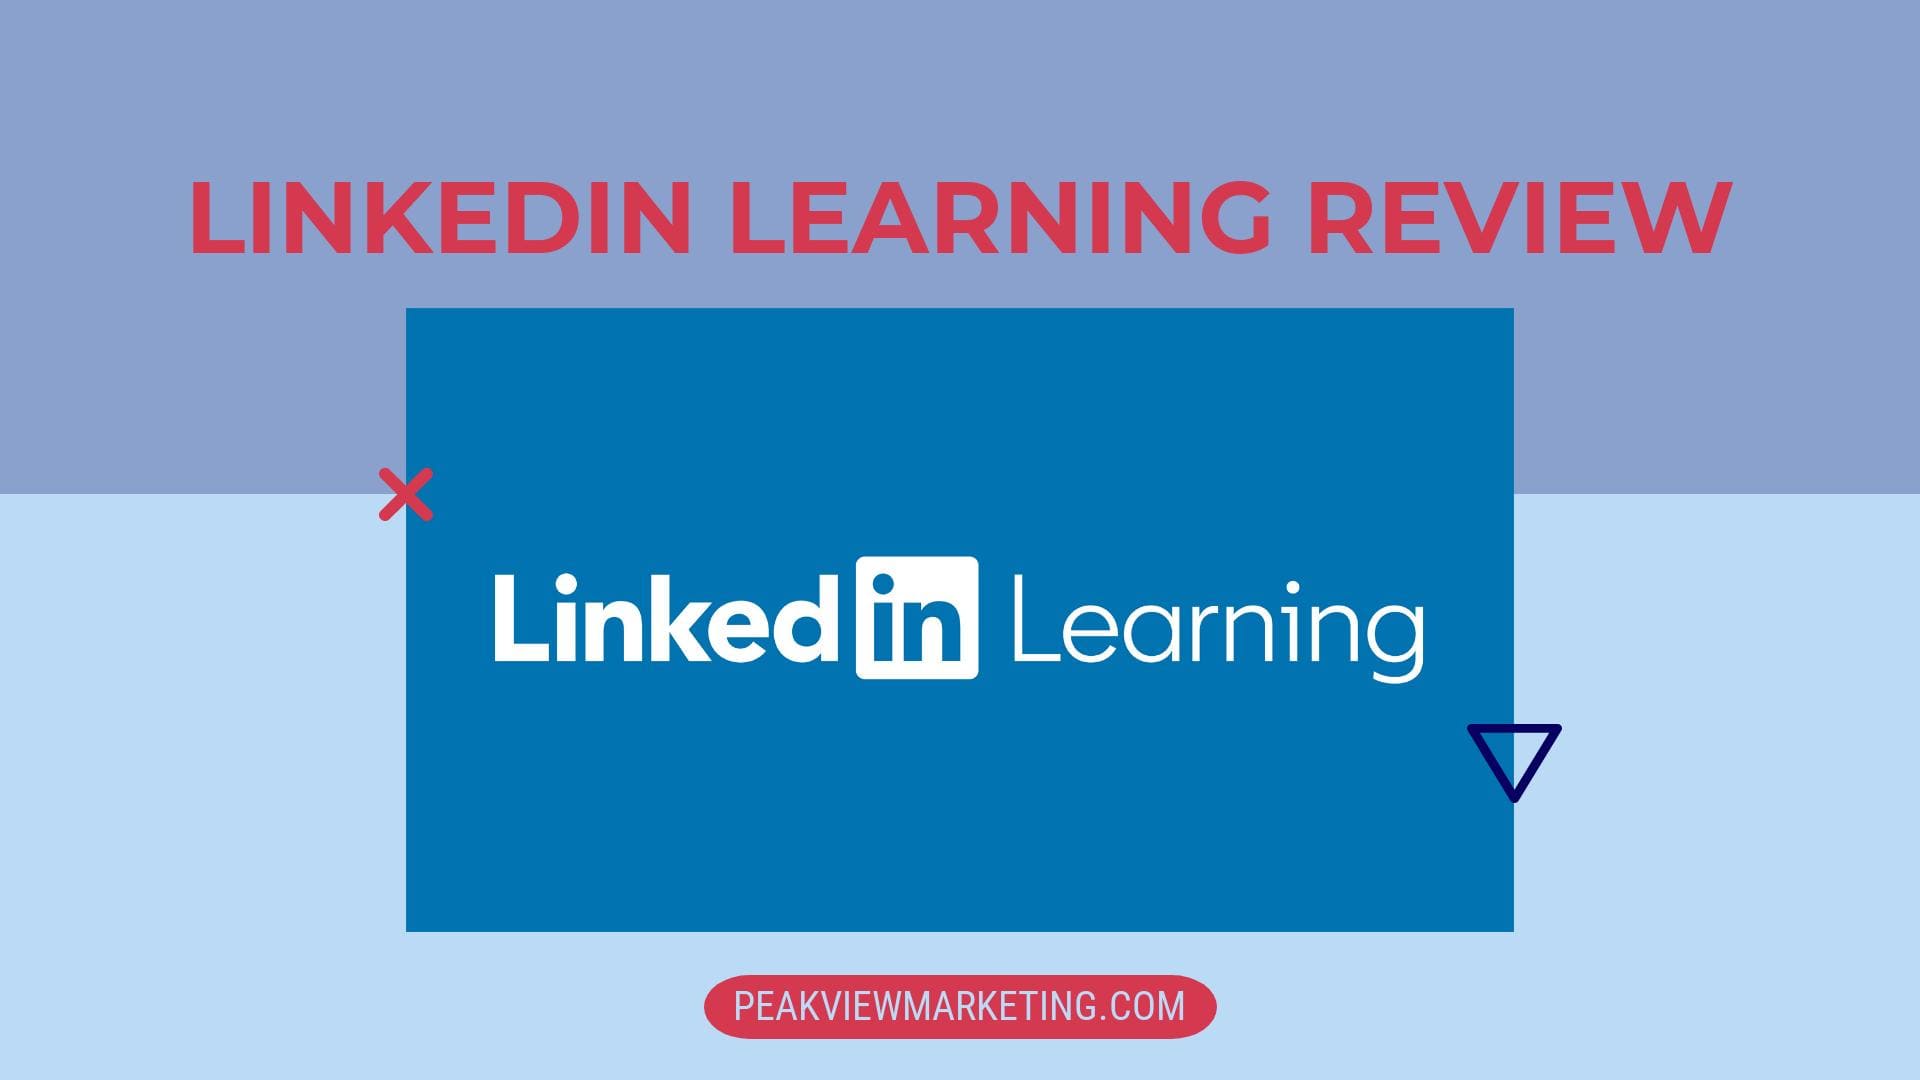 LinkedIn Learning Review Image